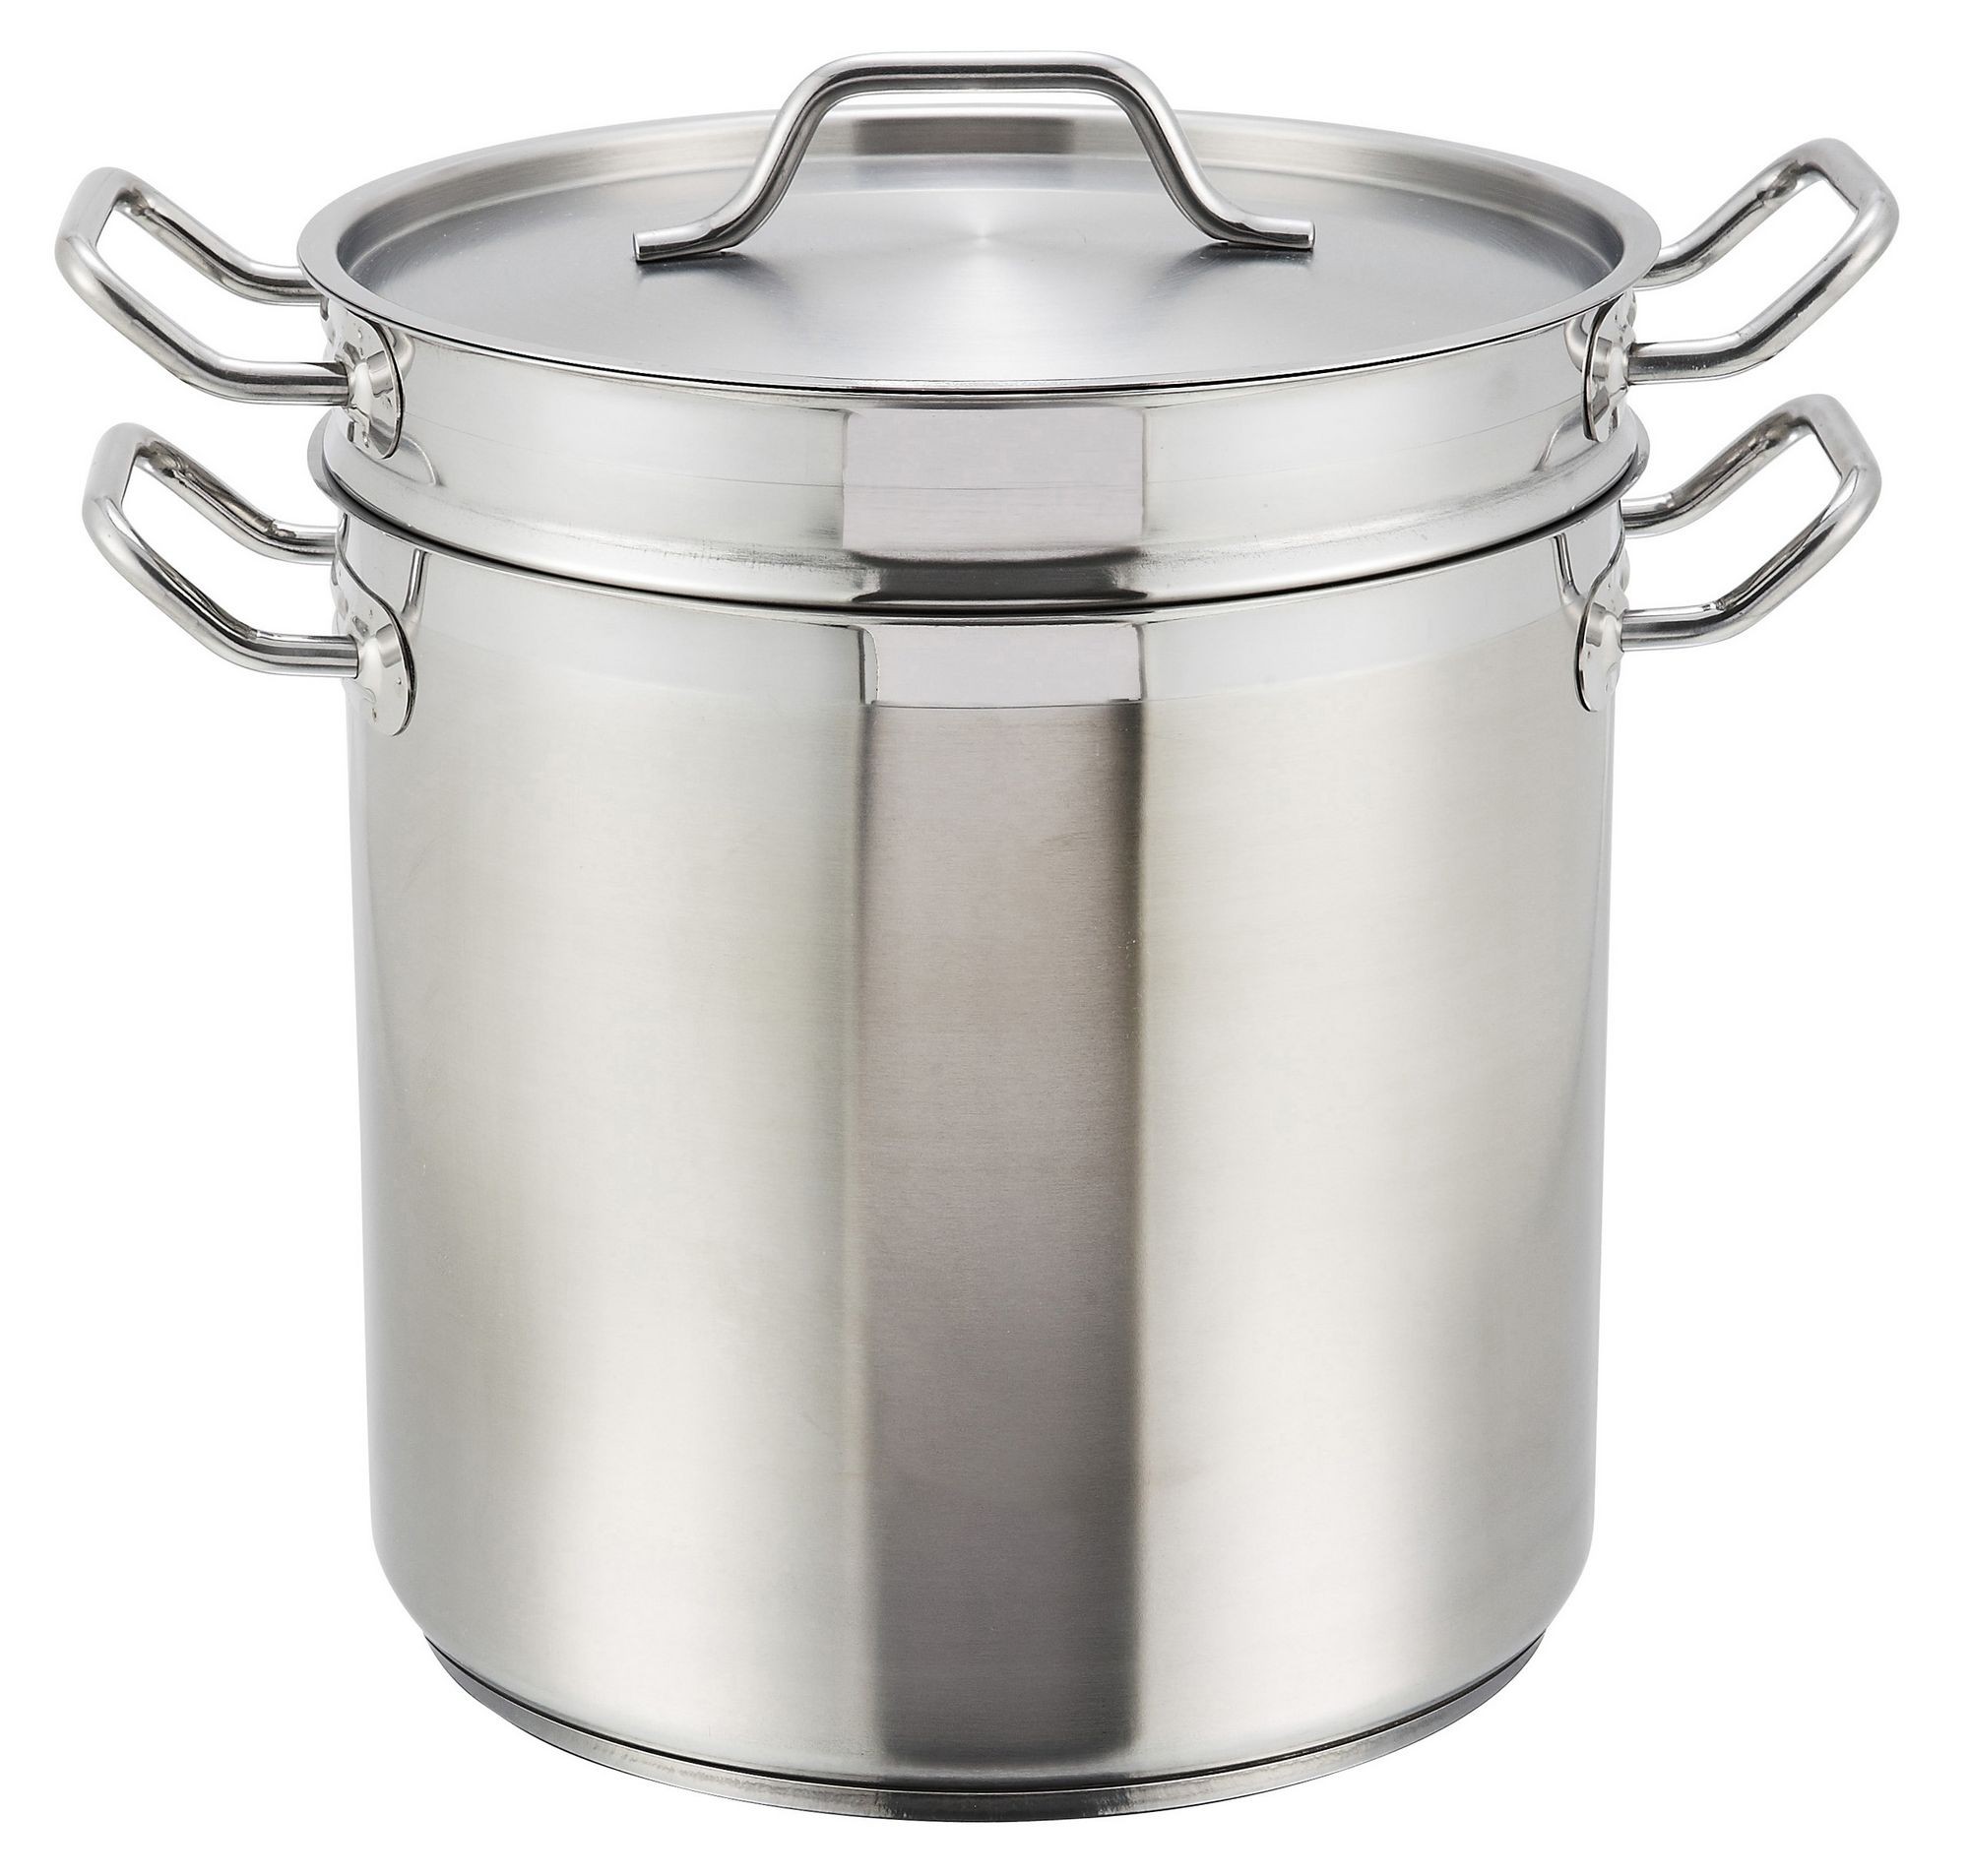 Stainless Steel 20-Qt Master Cook Steamer/Pasta Cooker With Cover (5 mm  aluminum core, NSF) - LionsDeal